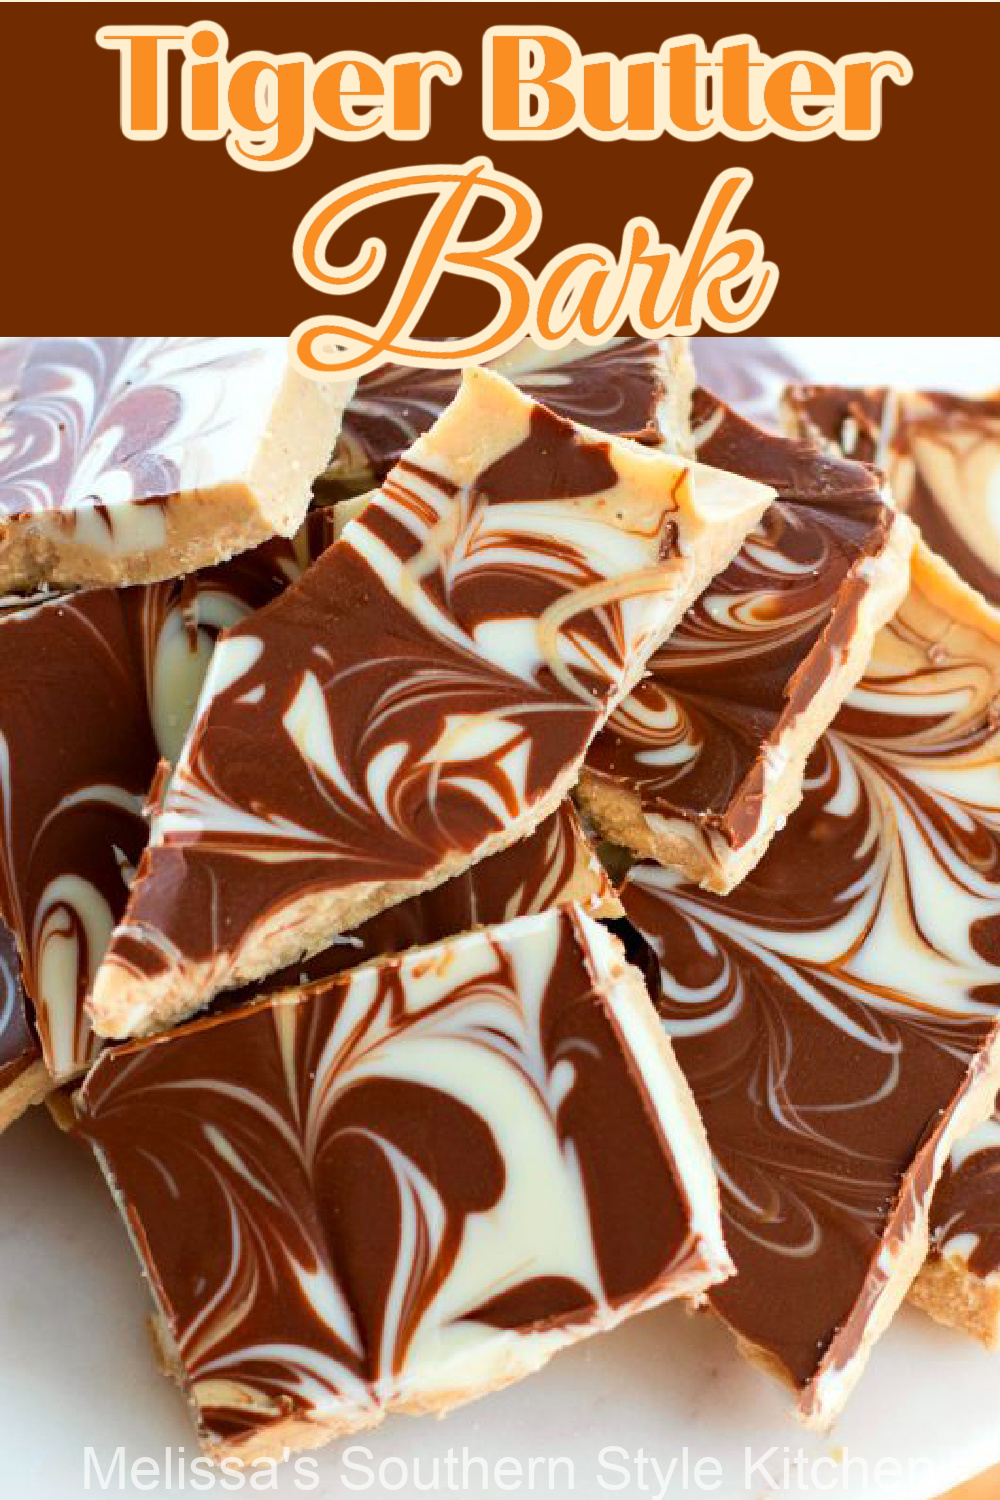 You can make a batch of this tricolor Tiger Butter Bark in no time flat! #tigerbutter #tigerbutterbark #whitechocolate #peanutbutter #chocolate #candy #christmacandy #candyrecipes #christmasrecipes #holidayrecipes #southernfood #southernrecipes via @melissasssk